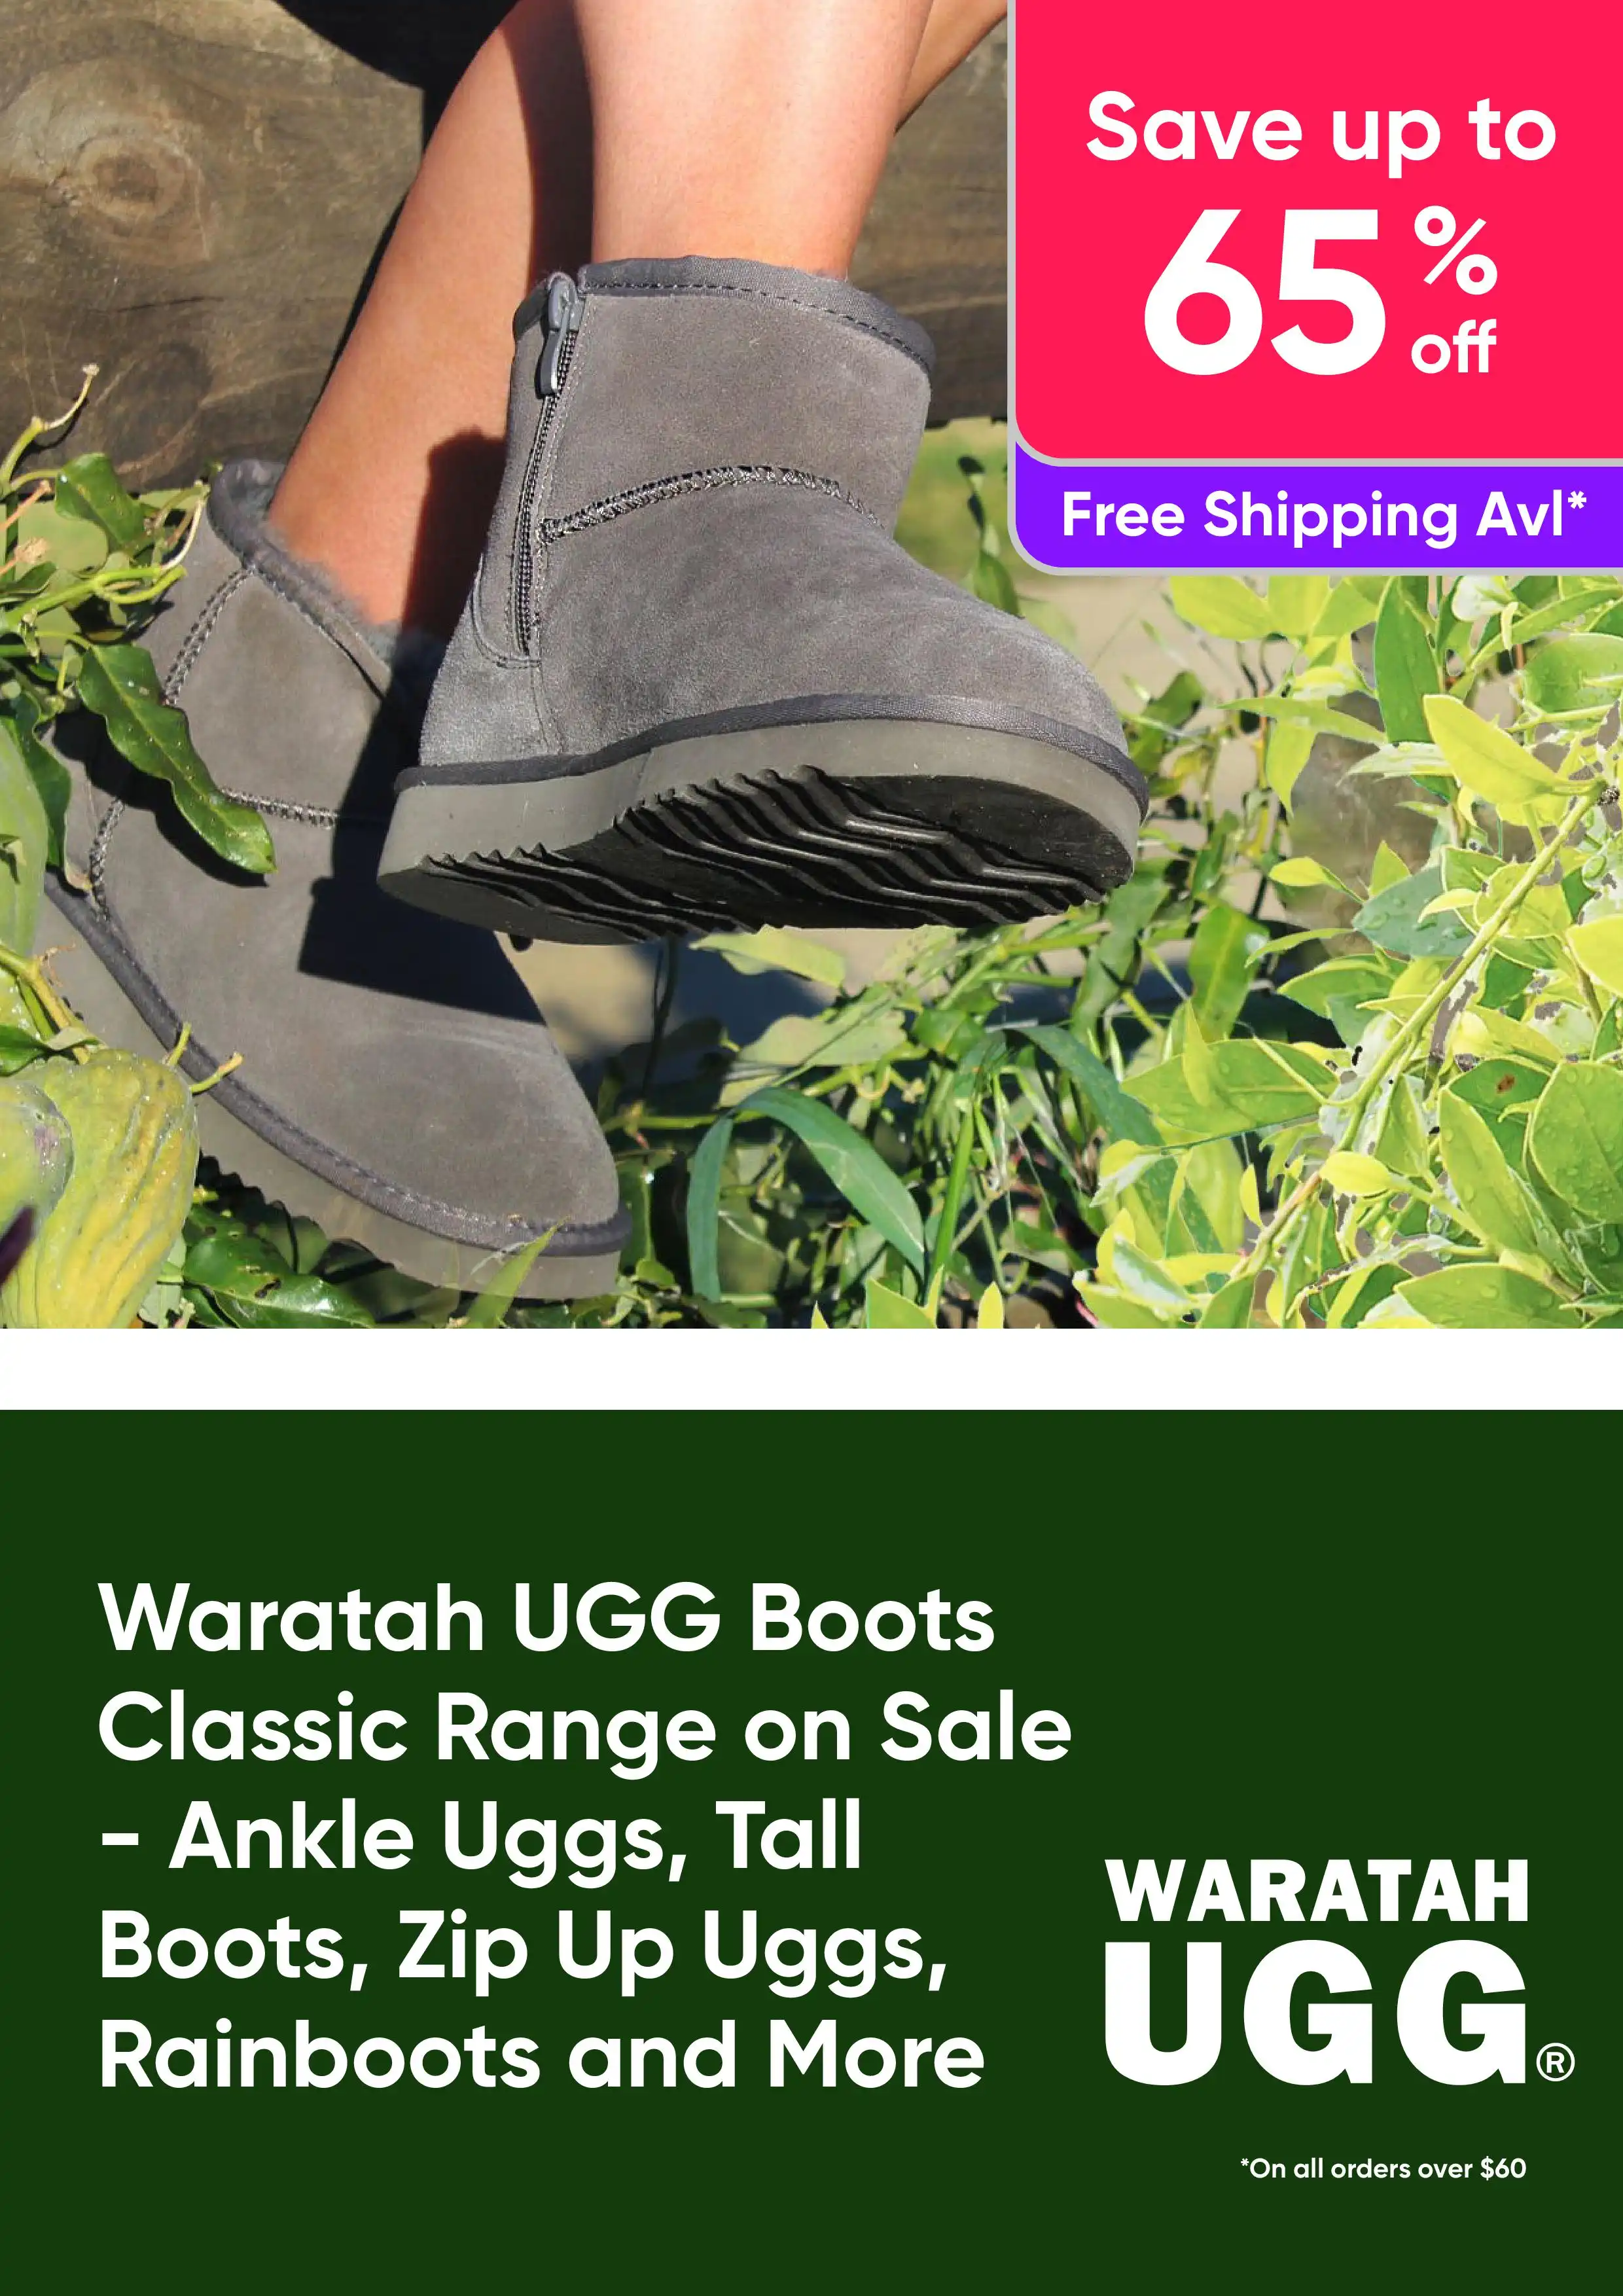 Waratah UGG Boots Classic Range on Sale - Save Up To 65% Off